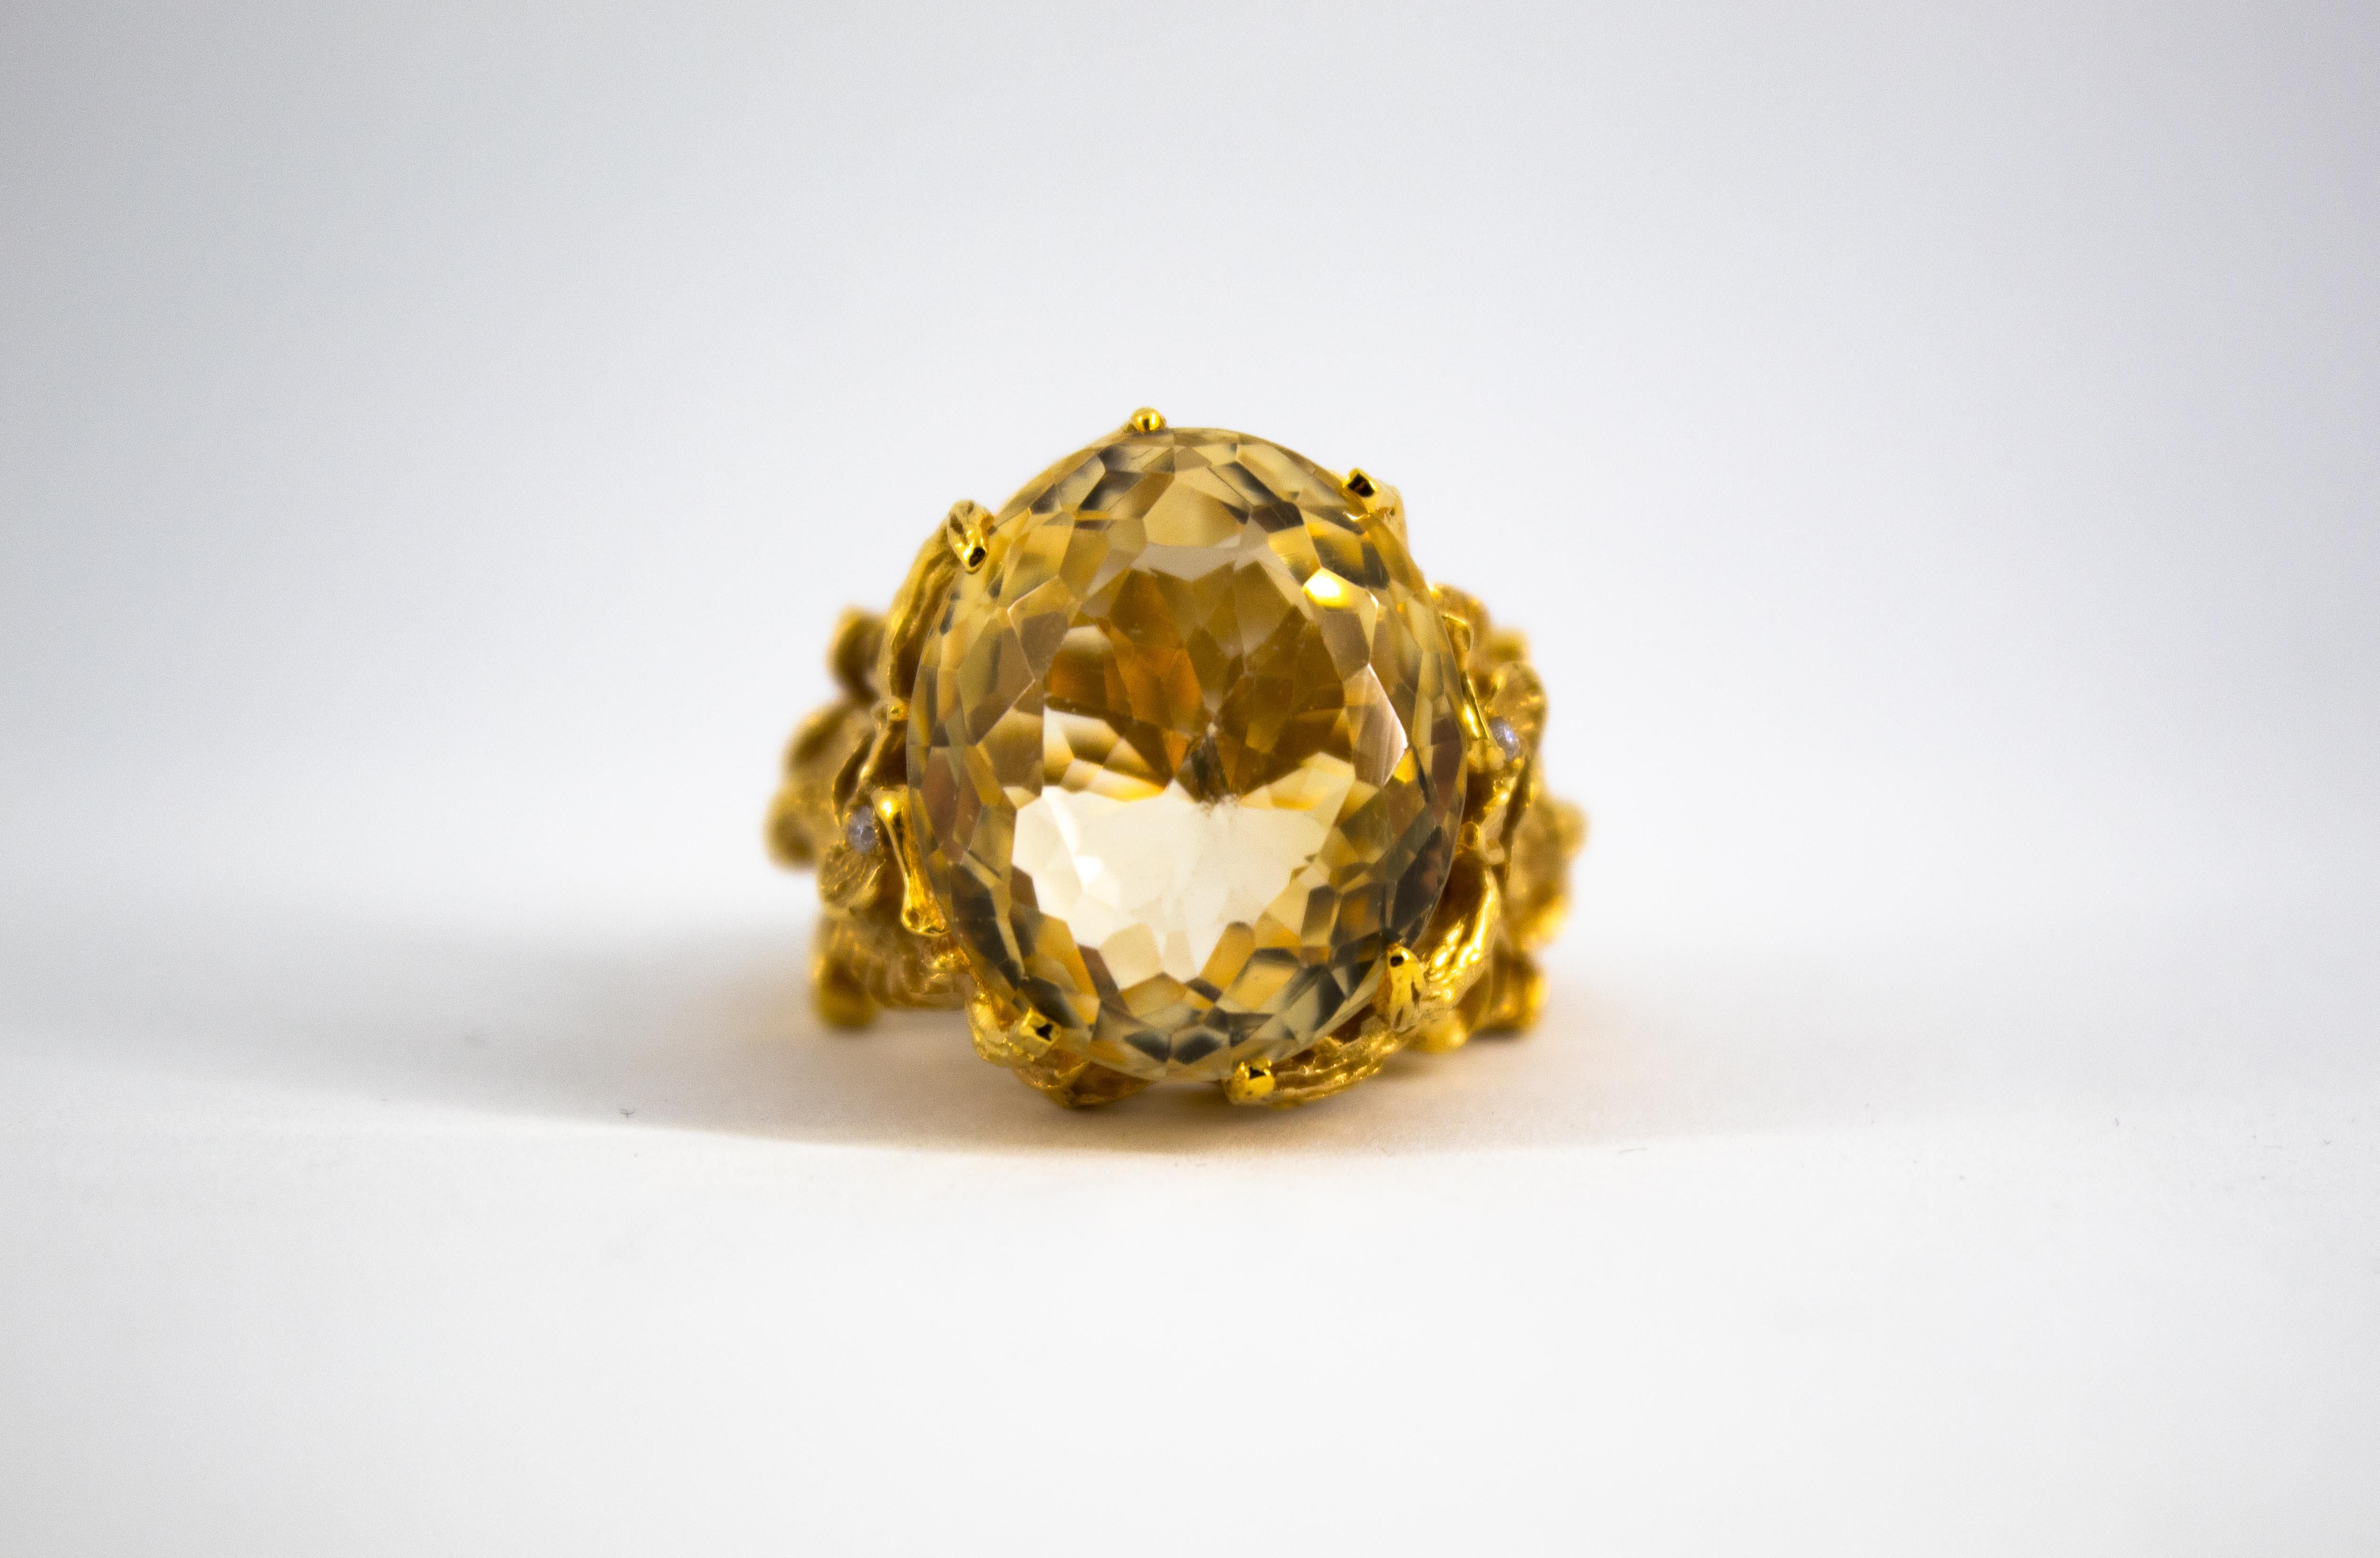 This Ring is made of 14K Yellow Gold.
This Ring has 0.02 Carats of White Diamonds.
This Ring has a 27.75 Carats circa Citrine Quartz.
Size ITA: 14 USA: 7 
We're a workshop so every piece is handmade, customizable and resizable.